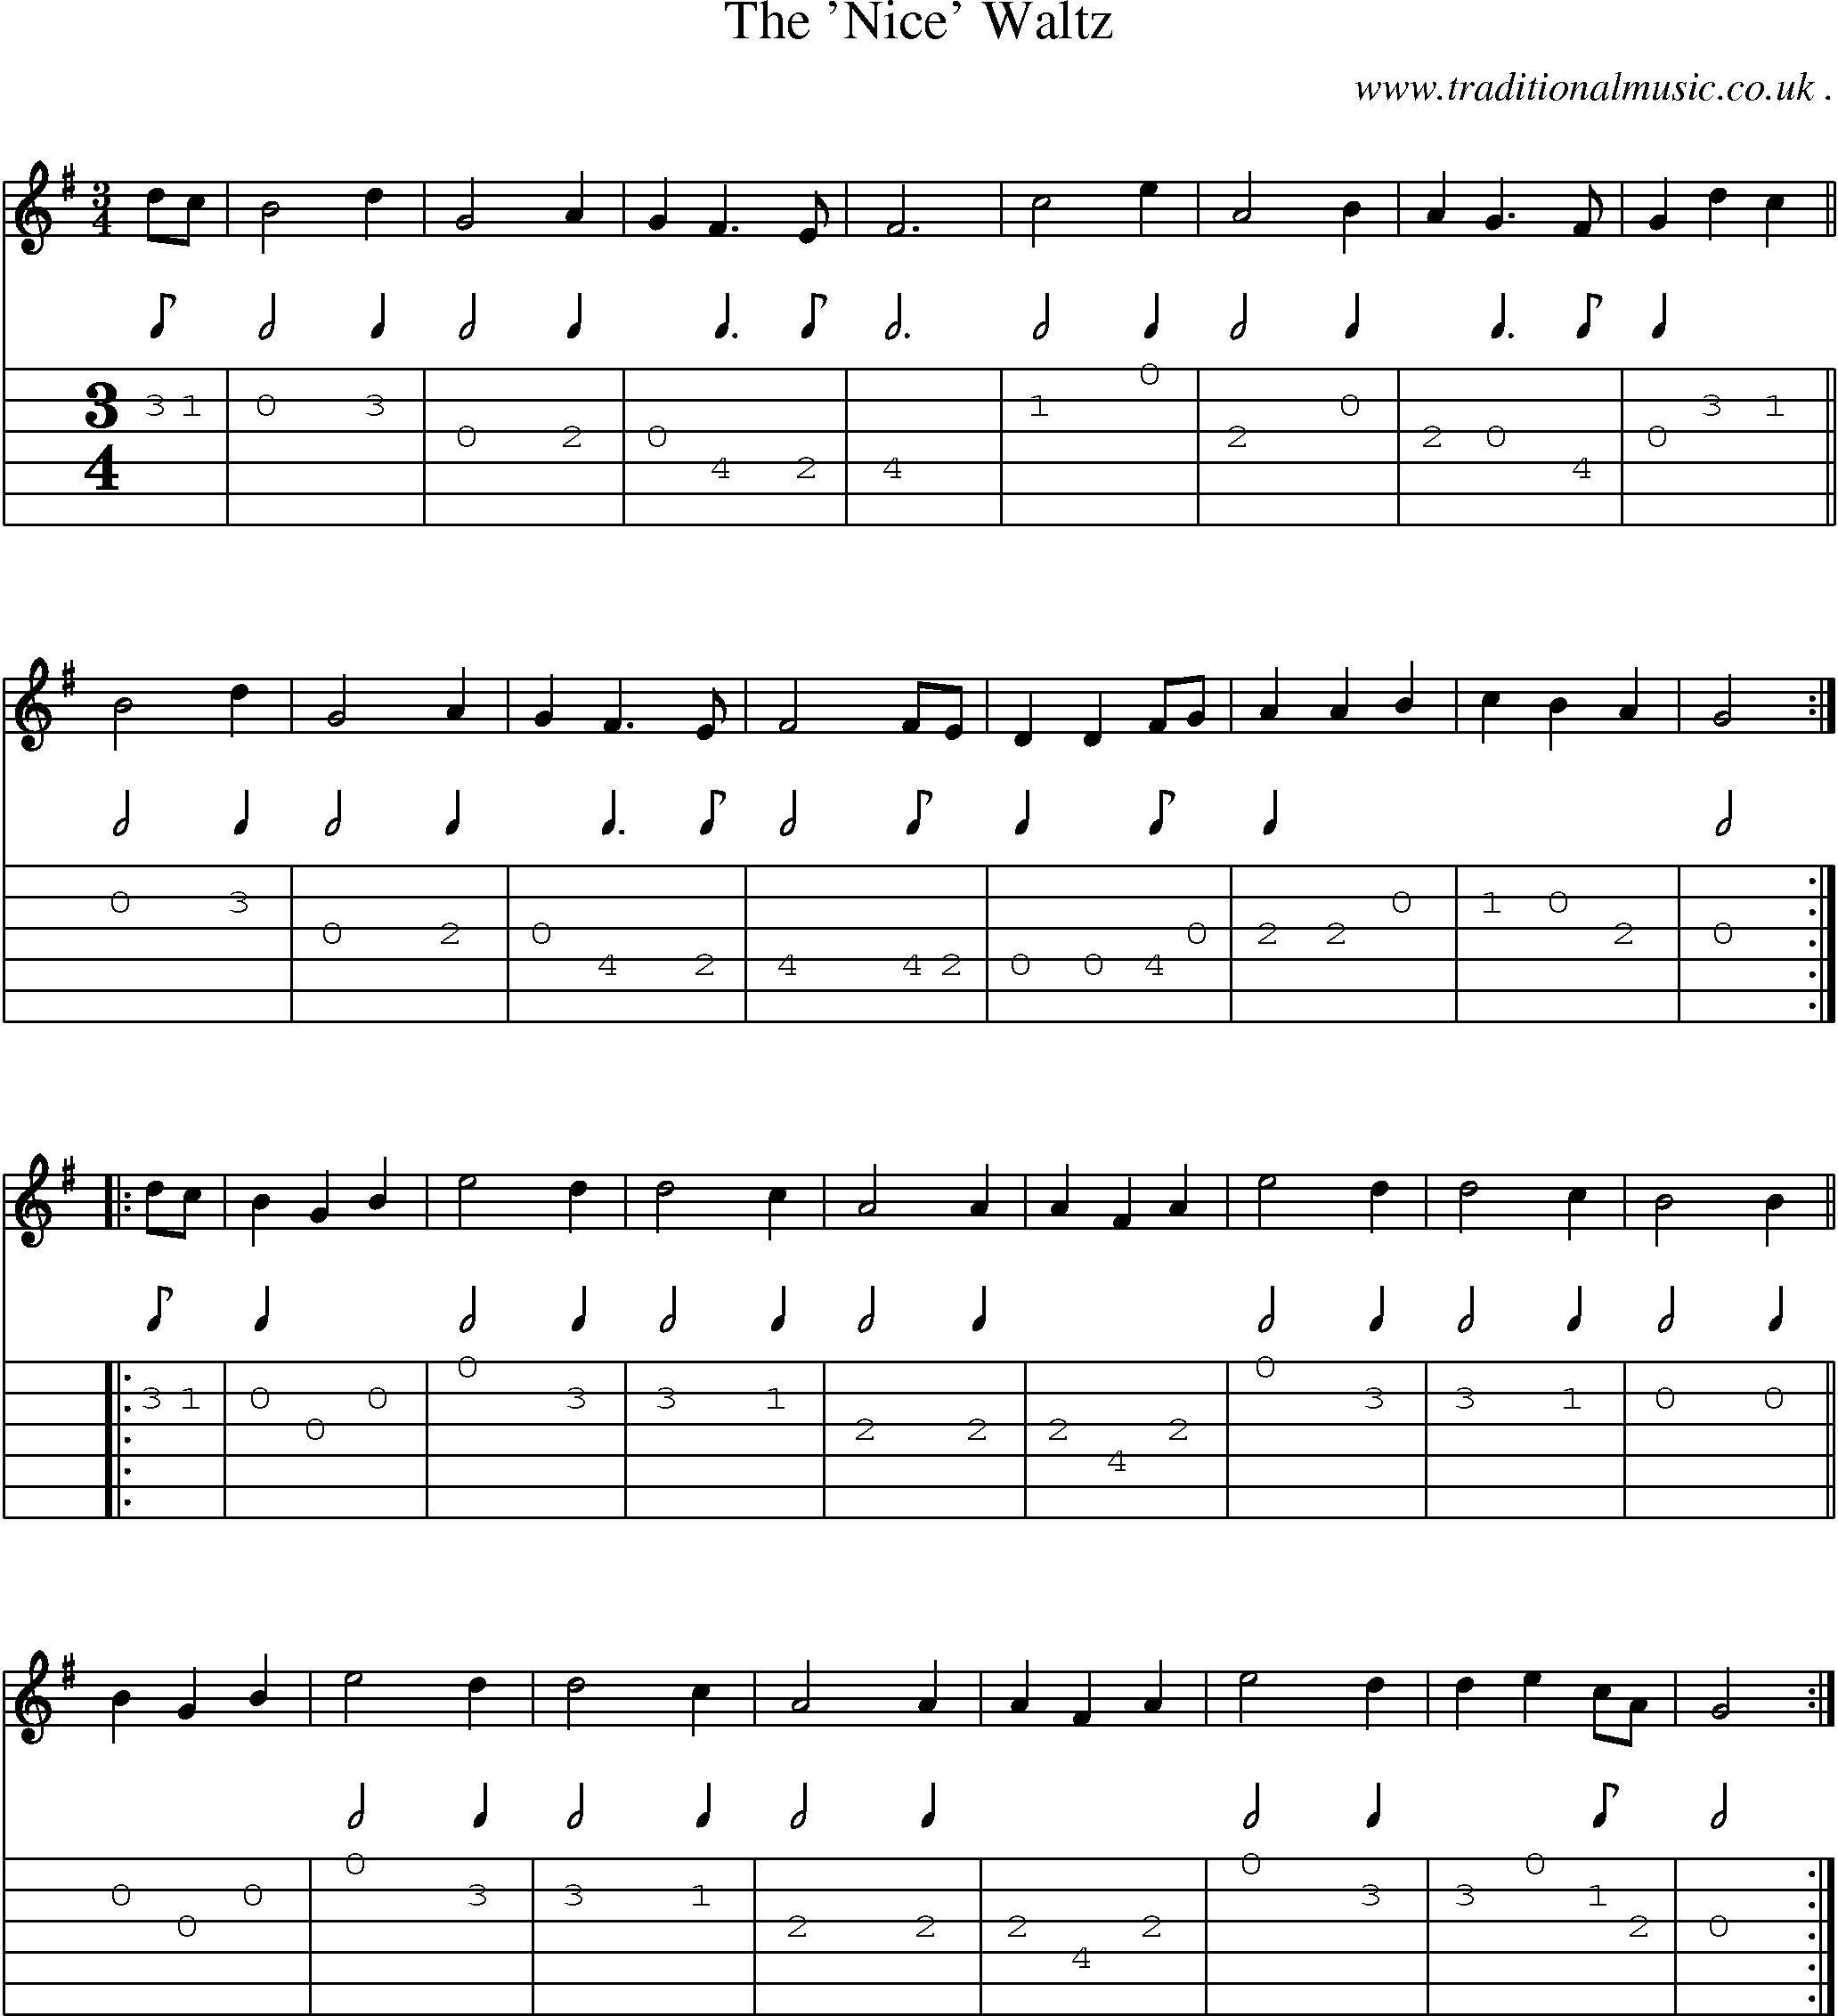 Sheet-Music and Guitar Tabs for The Nice Waltz